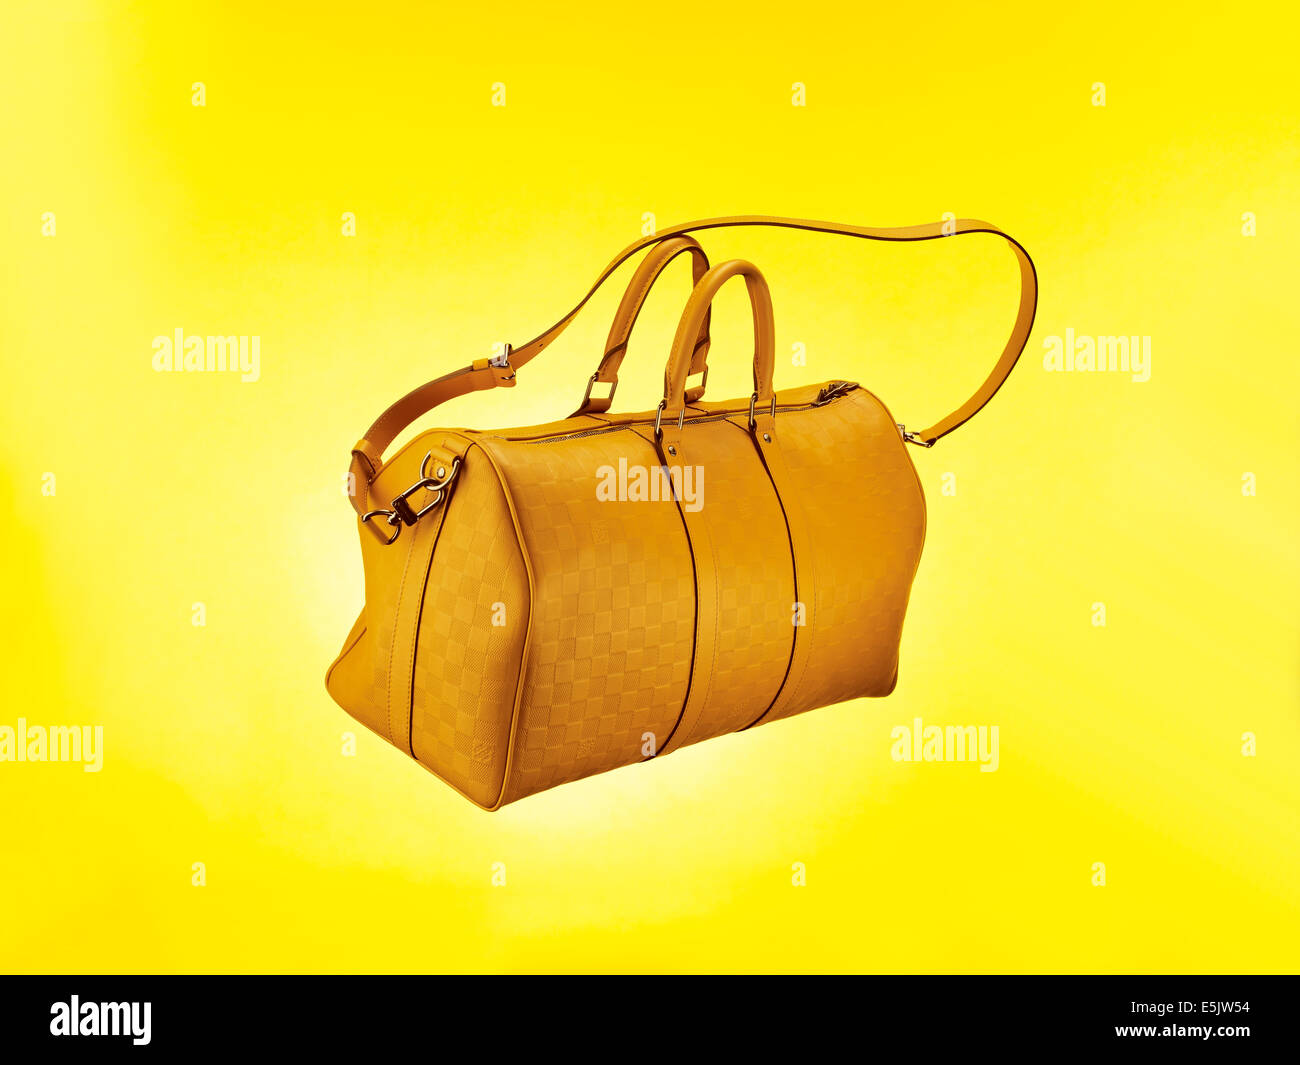 Bag flying with straps against a yellow background Stock Photo